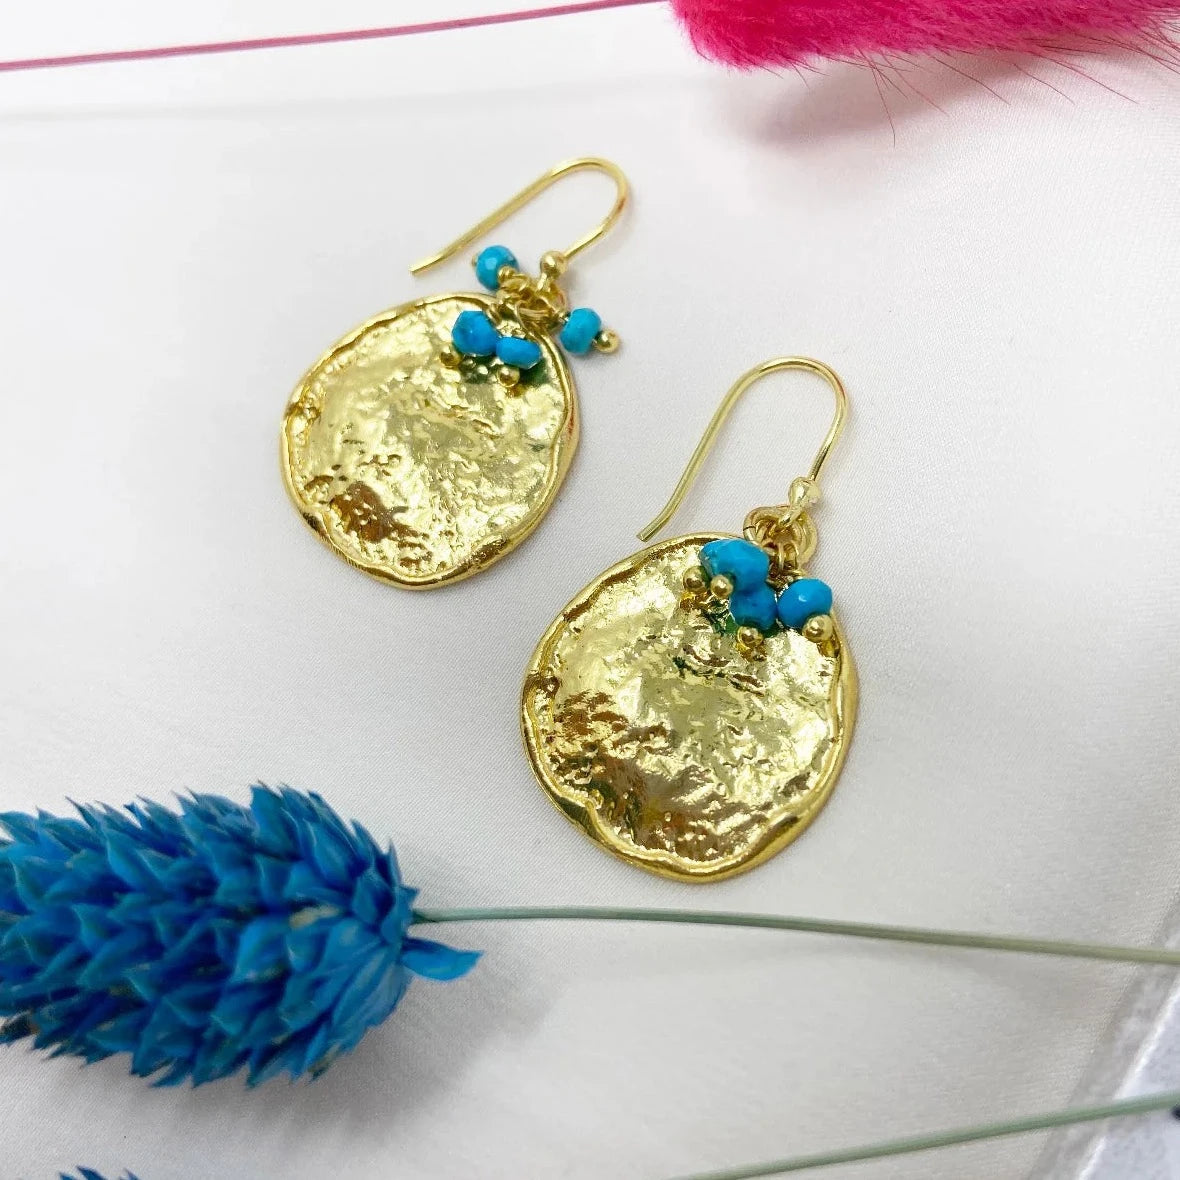 These handmade, drop earrings from Mazzi D Fiori, feature a rustic textured coin design and are adorned with turquoise gemstone beads and faceted semi-precious mini beads. Made with gold-plated materials, they are lightweight and versatile, perfect for both everyday use and more formal events. This style is a timeless addition to any accessory collection.